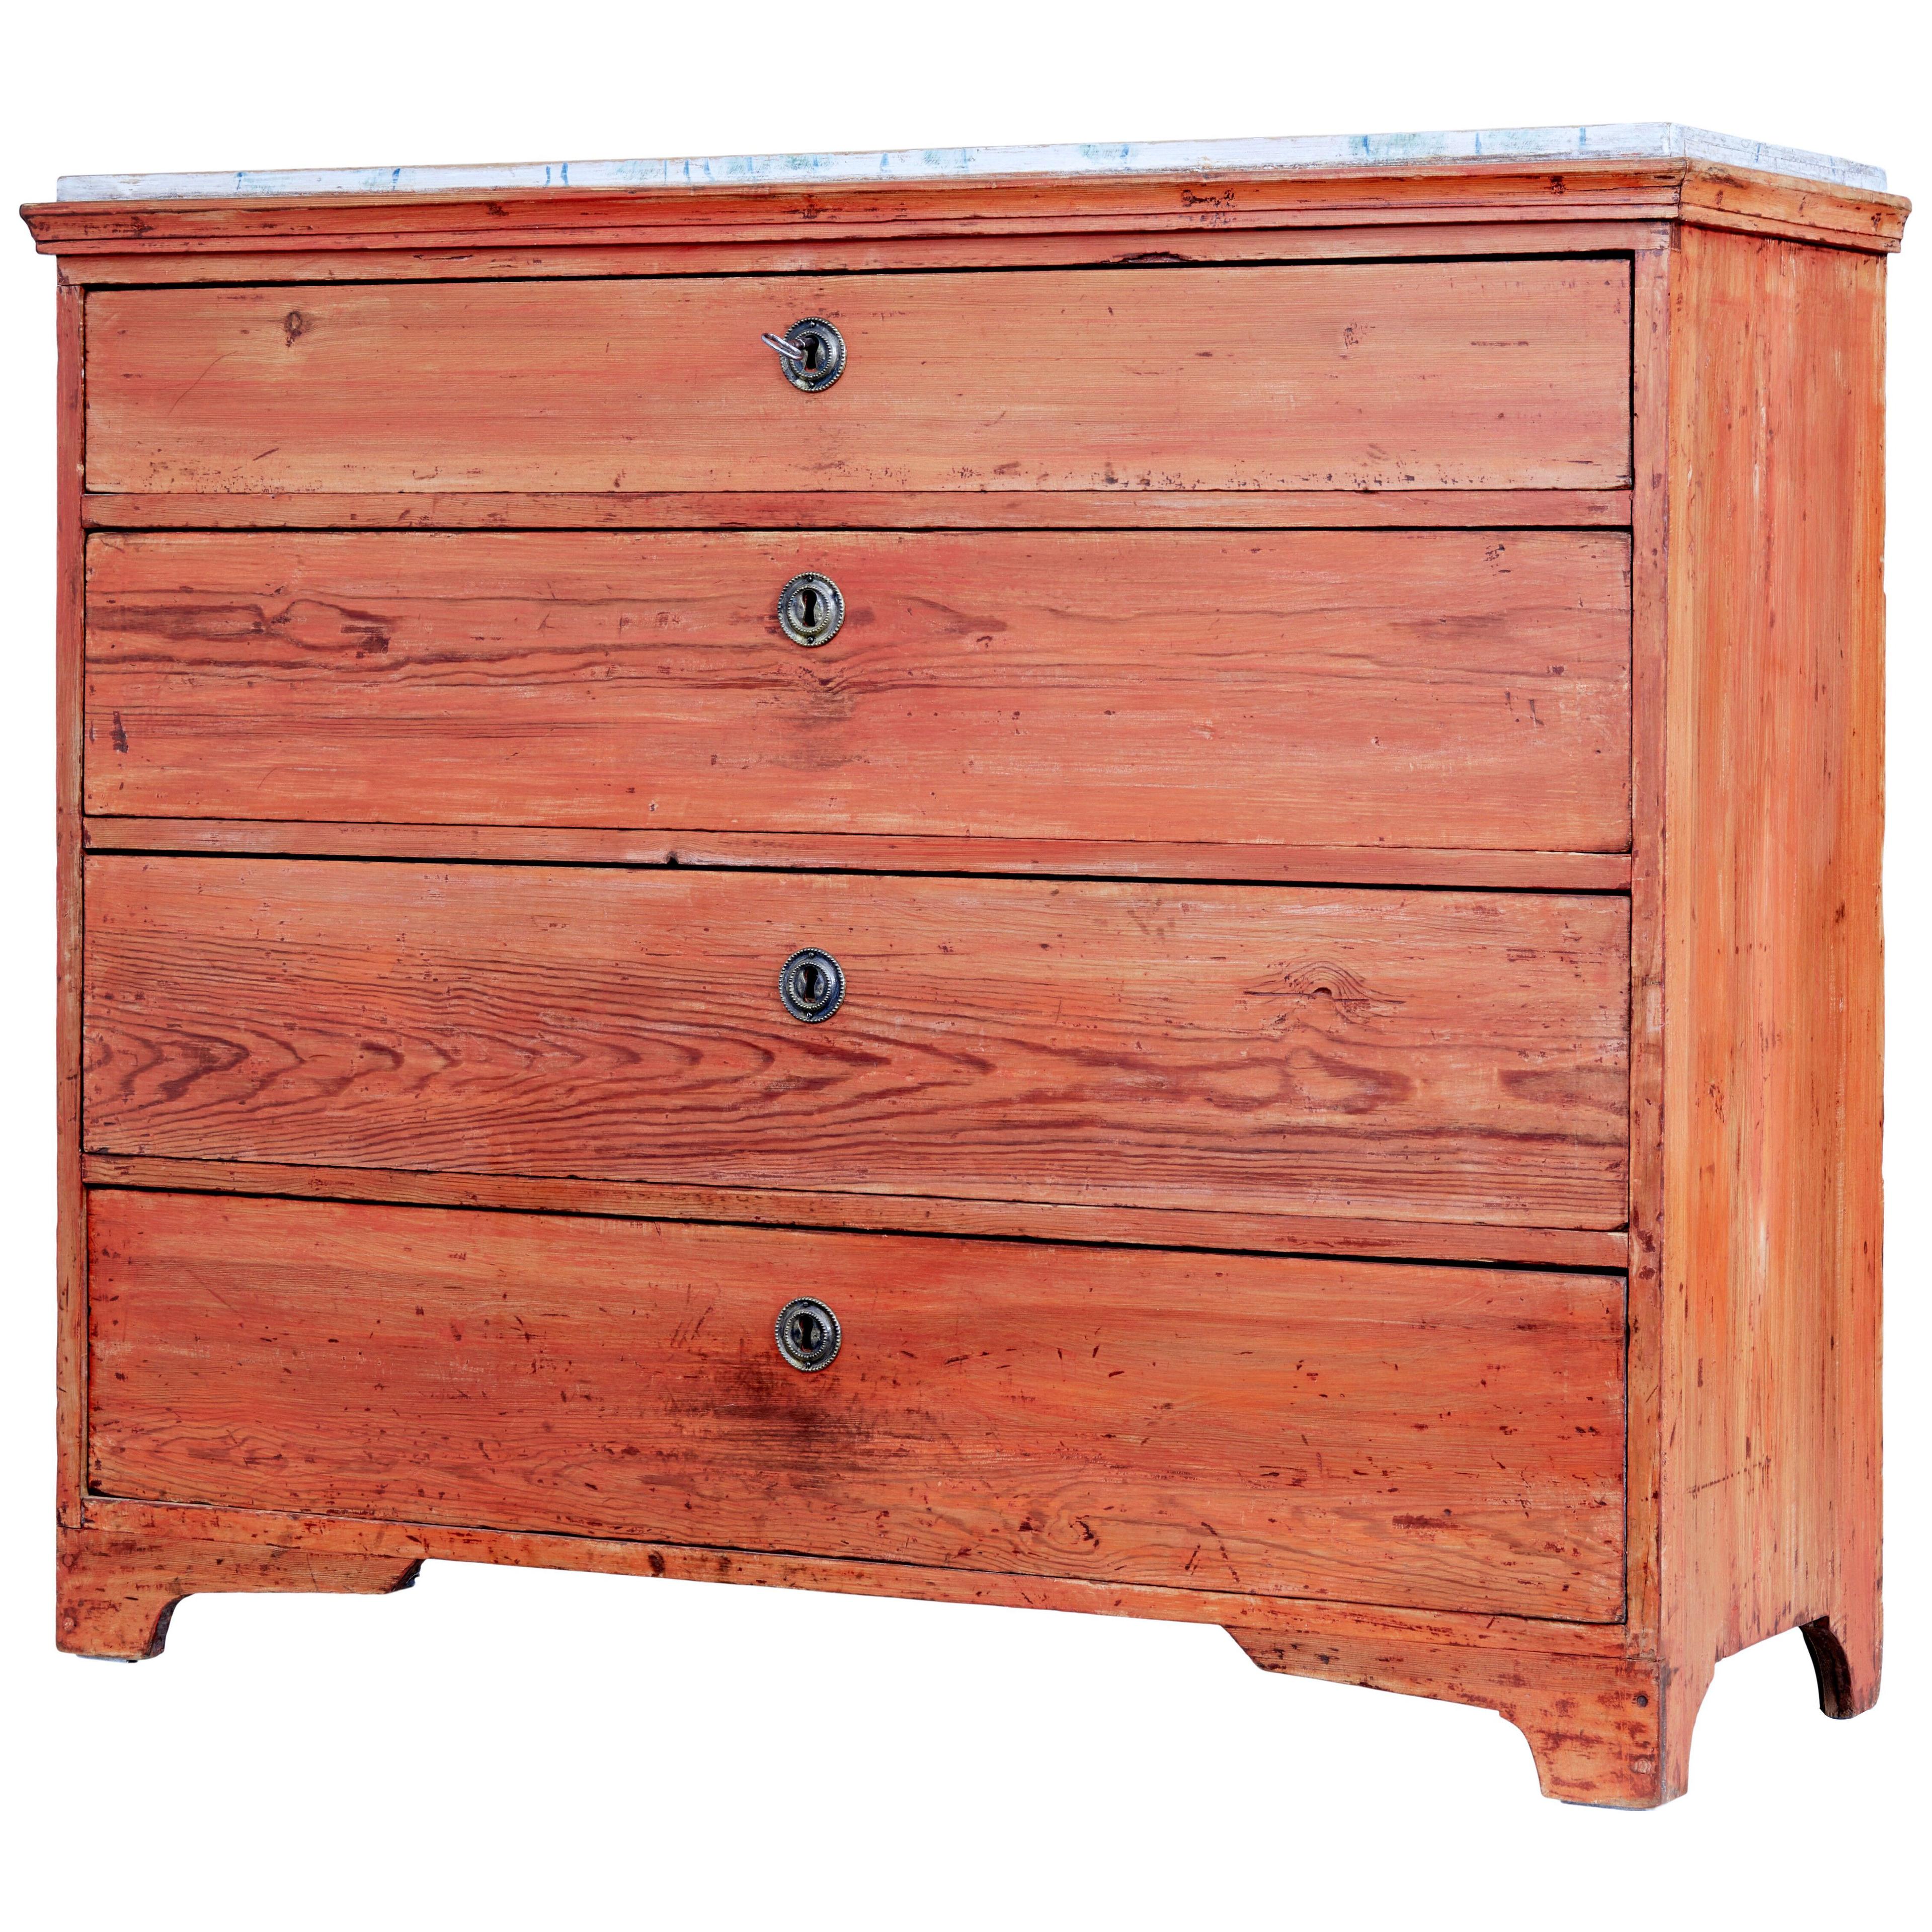 SWEDISH EARLY 19TH CENTURY PAINTED PINE CHEST OF DRAWERS